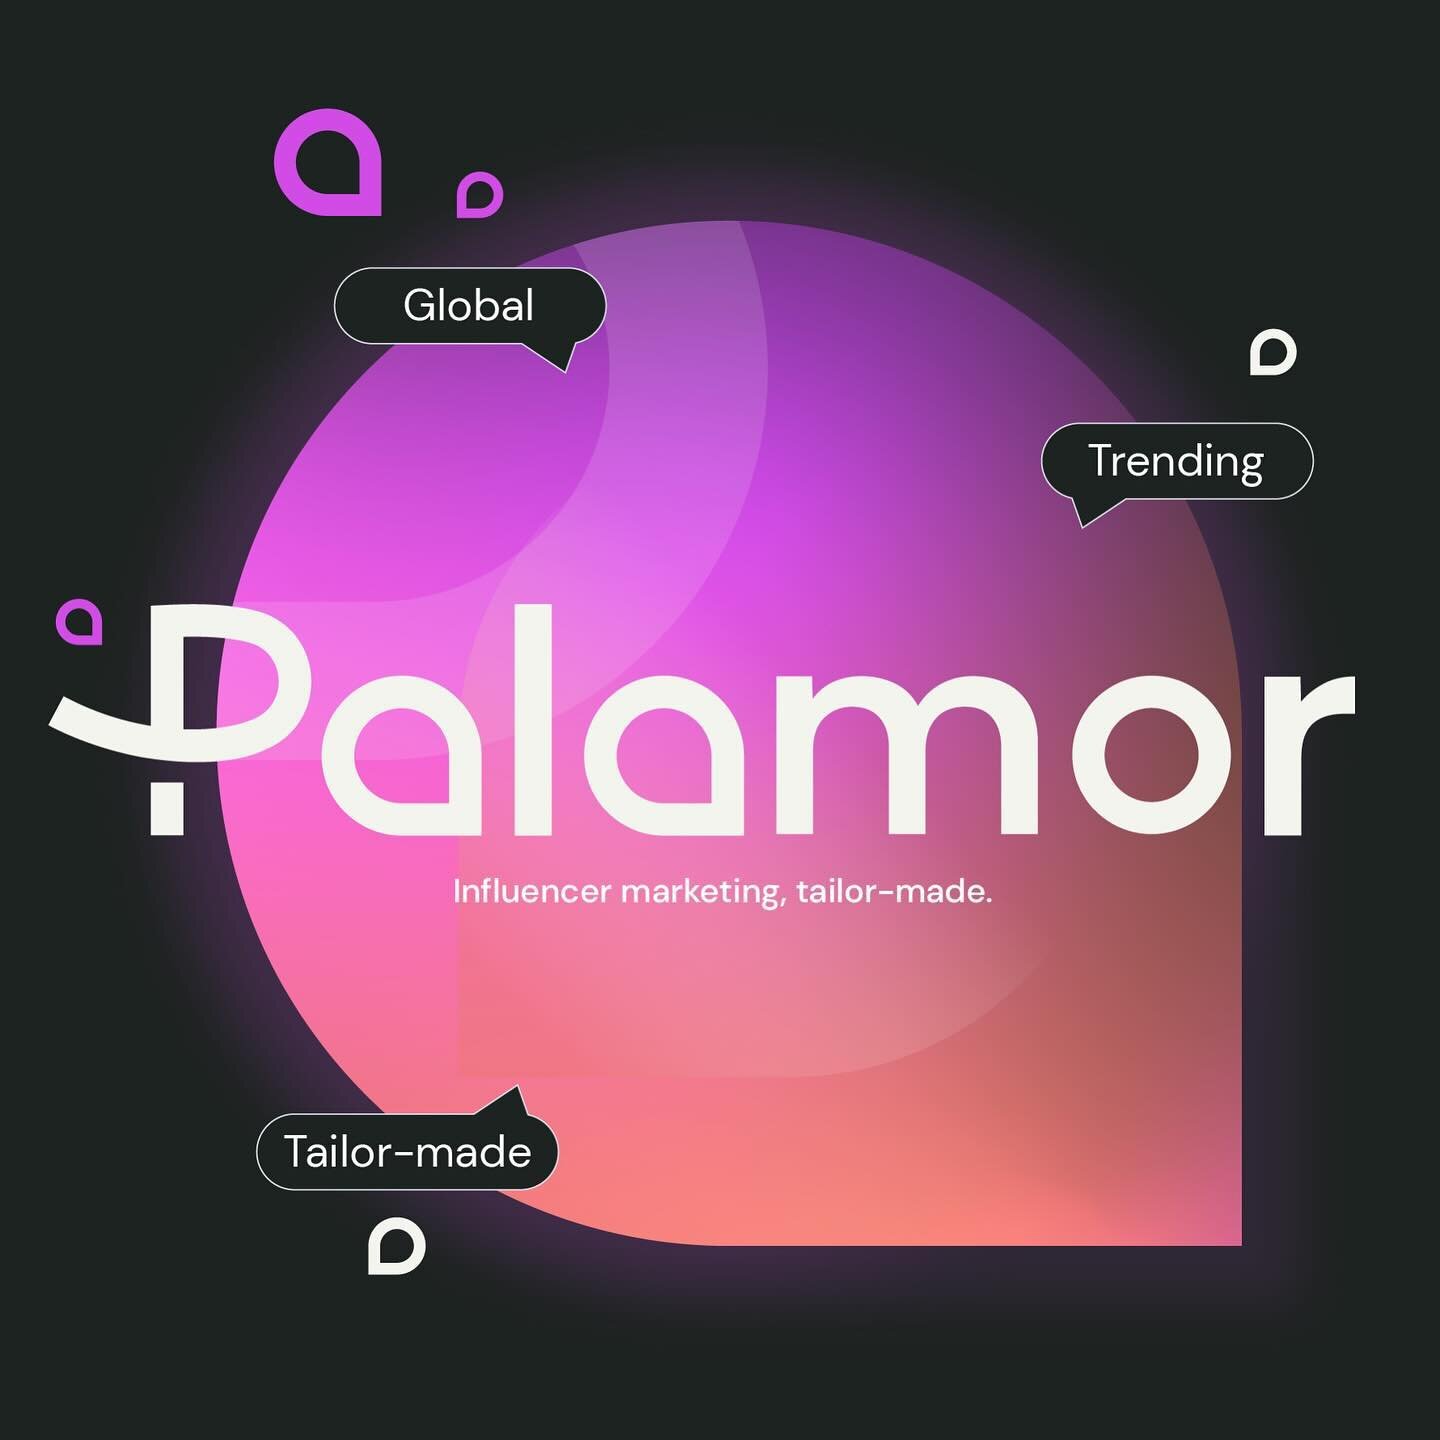 One of the latest brand identity projects I had the opportunity to design and direct at @barney.studio is Palamor, making sure to develop a unique and compelling identity that reflects the brand&rsquo;s diverse range of services, including marketing 